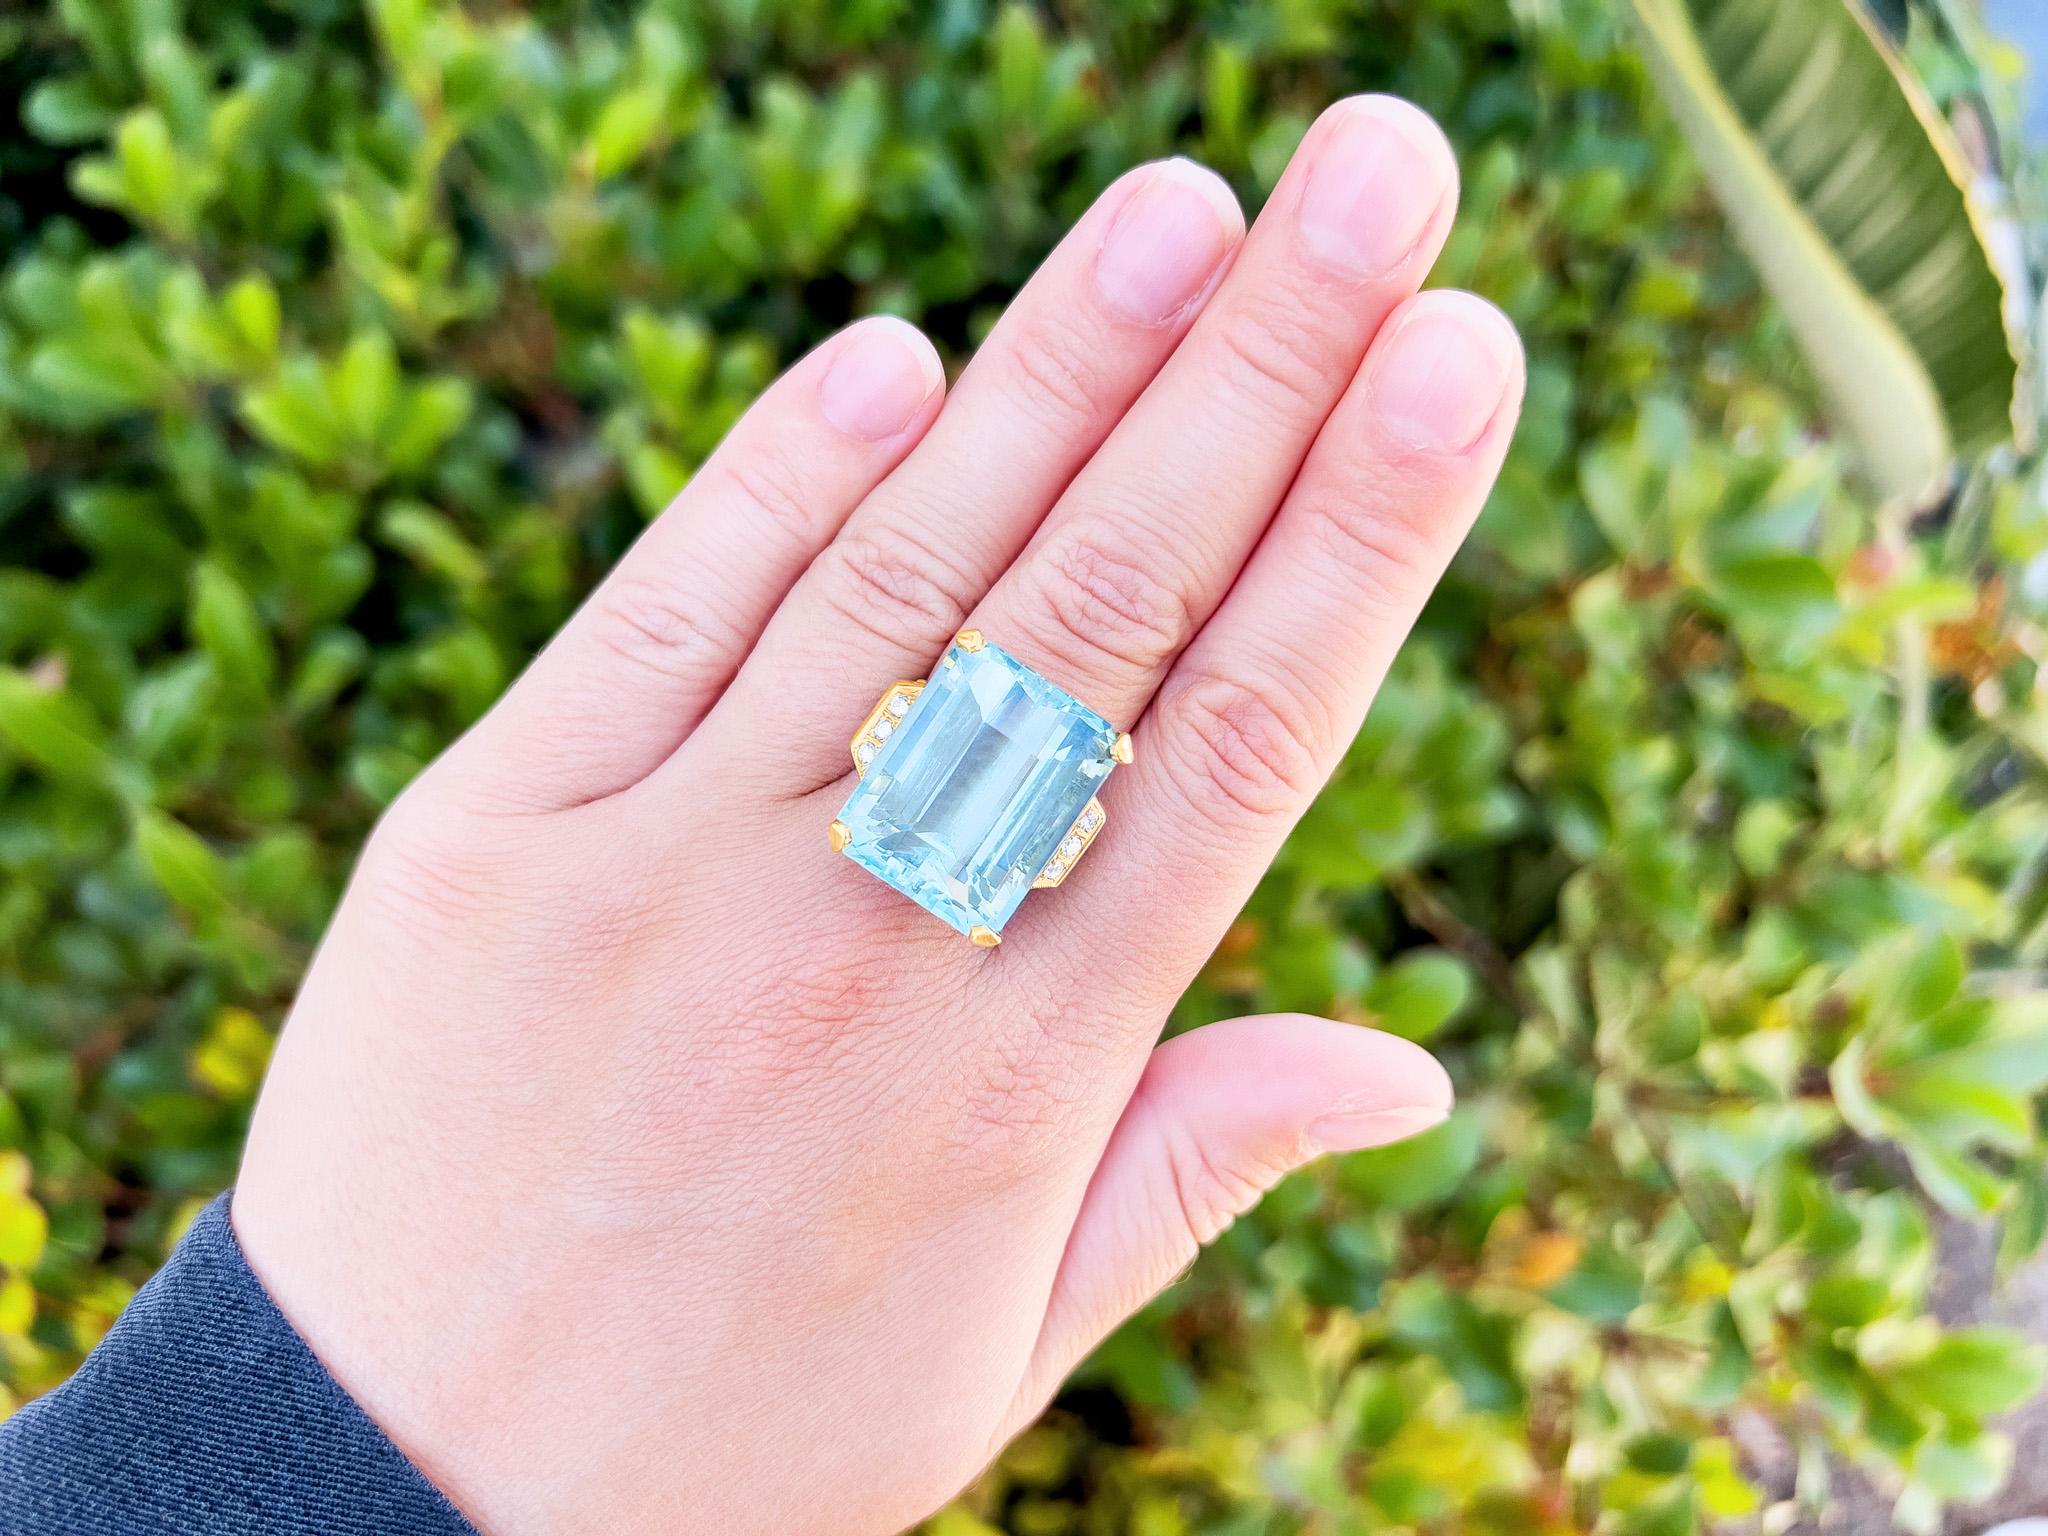 Aquamarine = 40 Carat
Diamonds = 0.18 Carats
( Color: G, Clarity: SI )
Metal: 14K Gold
Ring Size: 6.5* US
*It can be resized complimentary